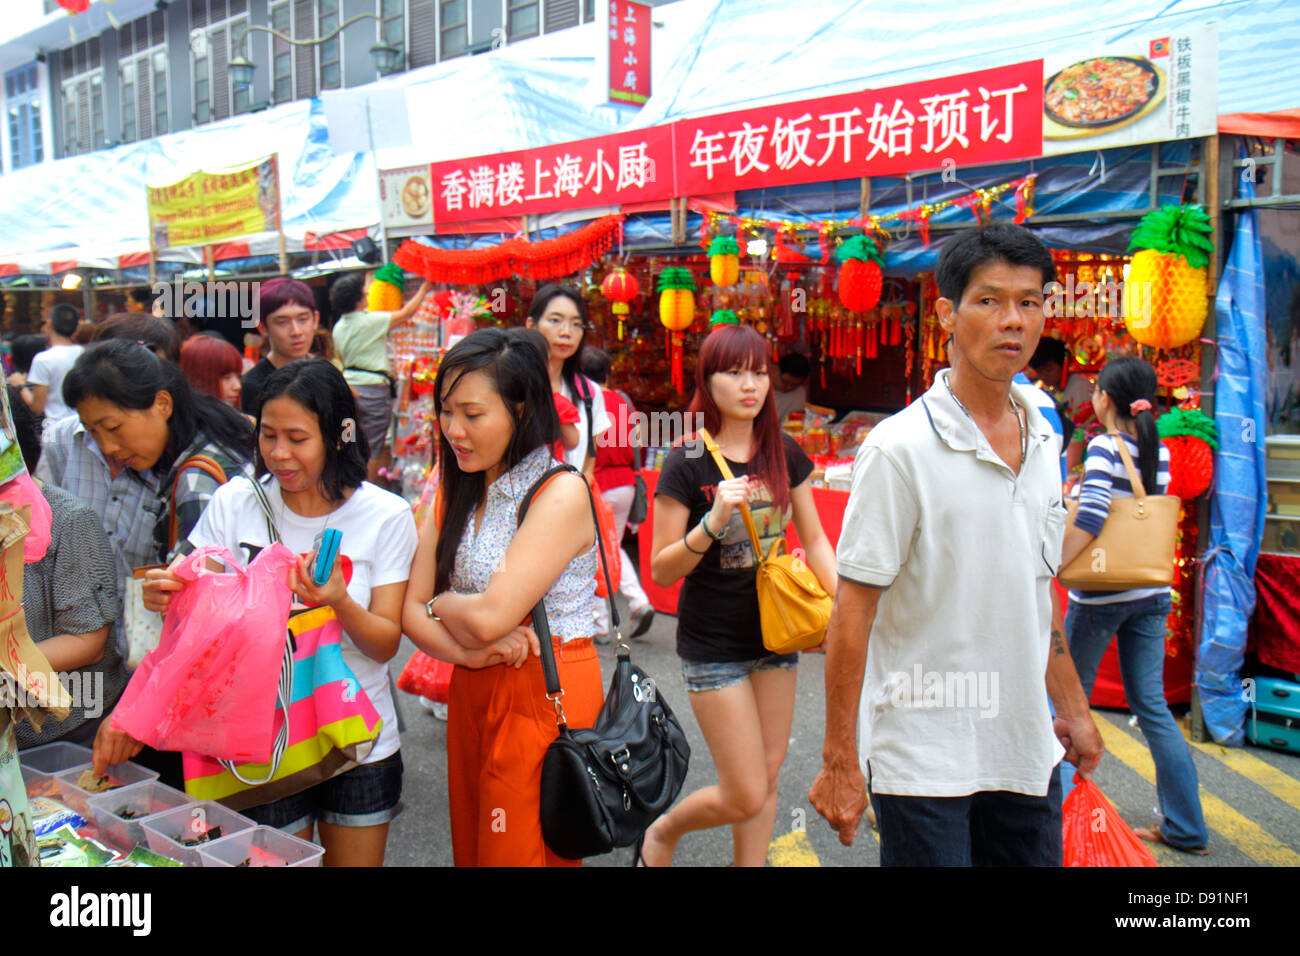 Singapore,Chinatown,shopping shopper shoppers shop shops market markets marketplace buying selling,retail store stores business businesses,Asian woman Stock Photo